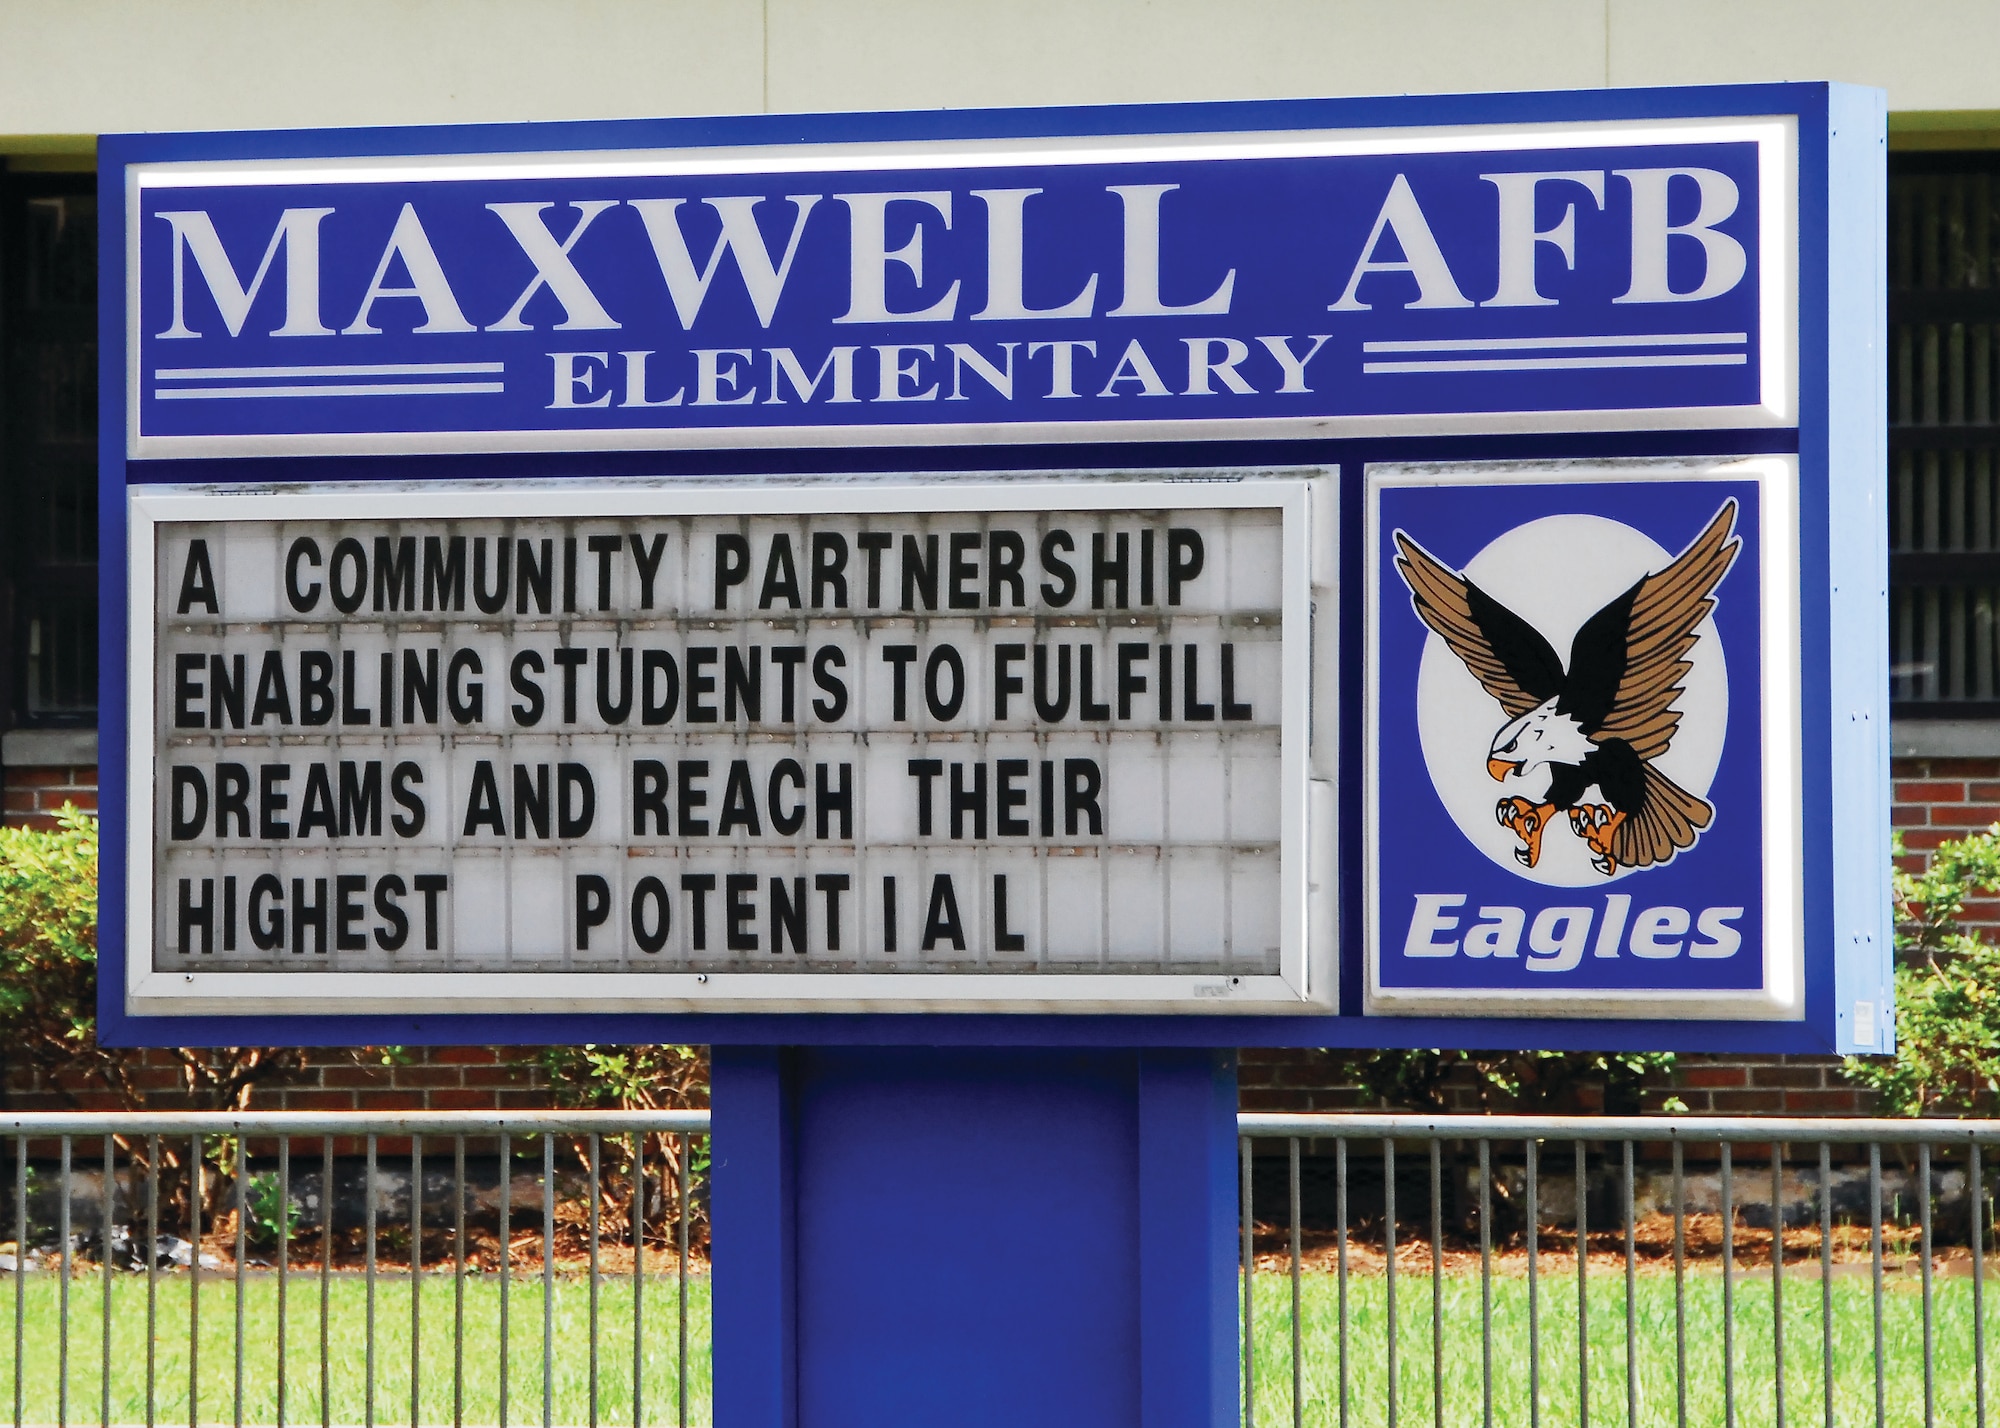 Maxwell Air Force Base Elementary School is gearing up to begin a new academic school year on base. (U.S. Air Force photo/Kimberly L. Wright)